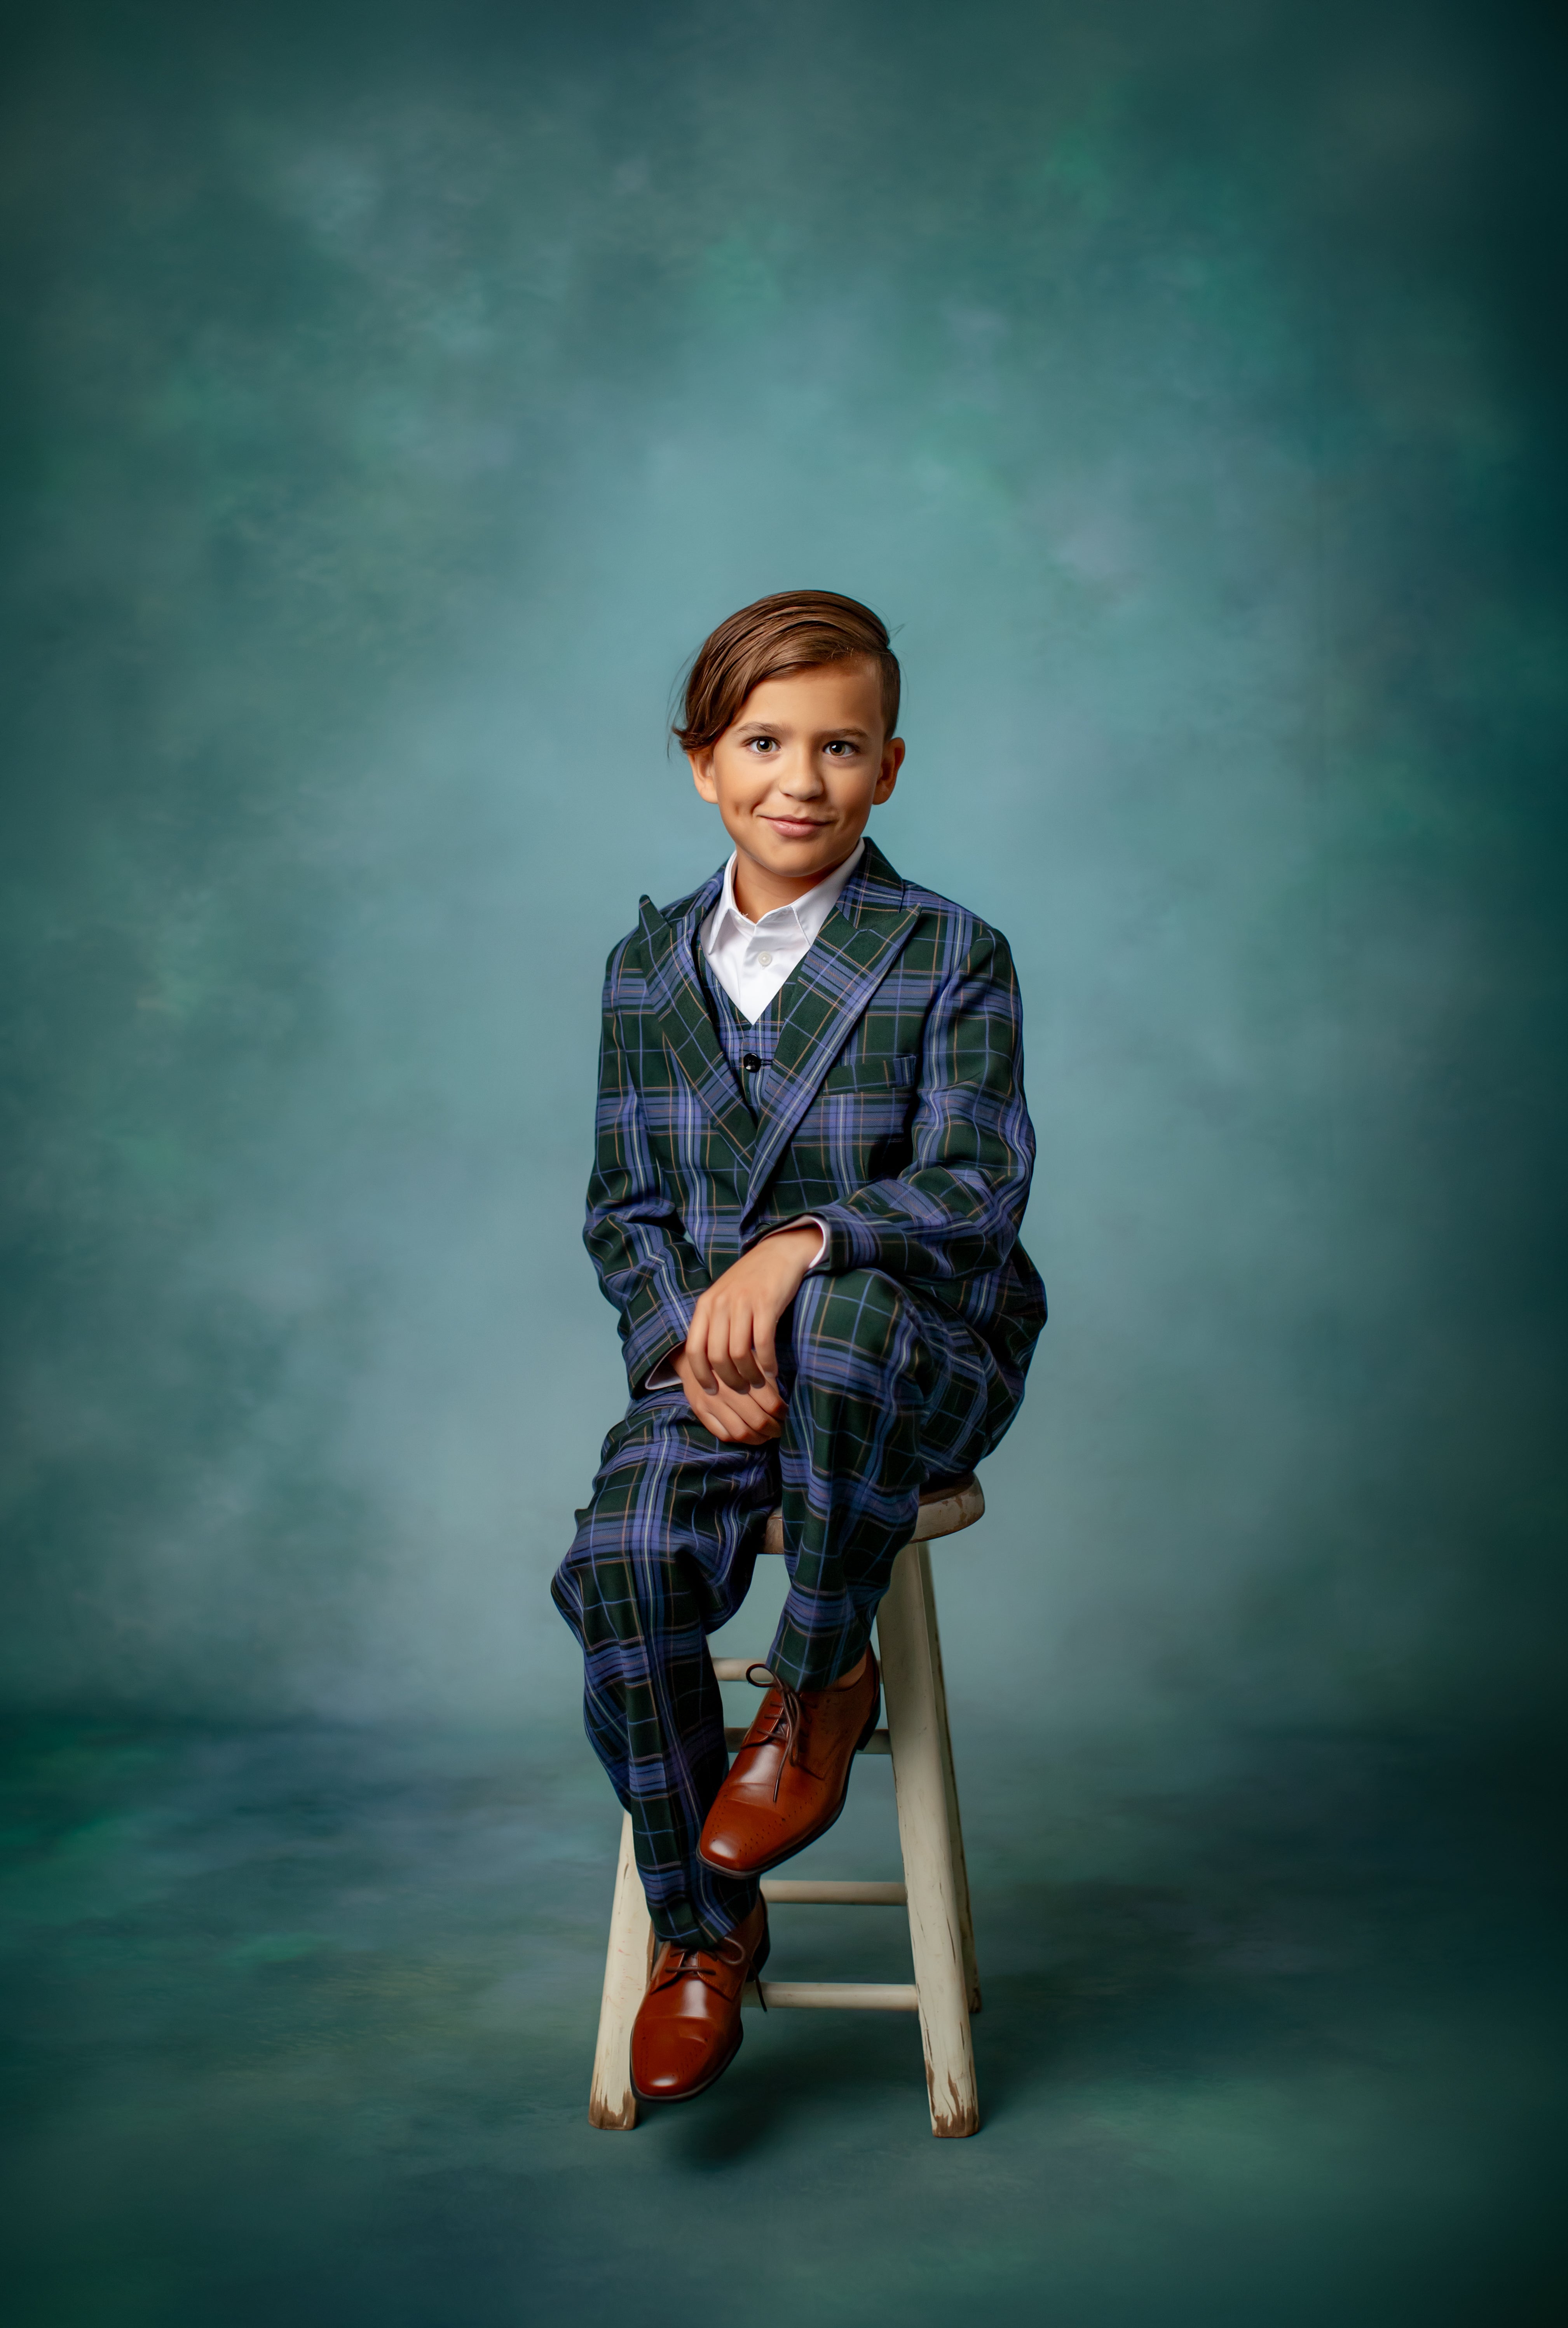 Boys custom suits - custom-order suits – now tailored to perfection